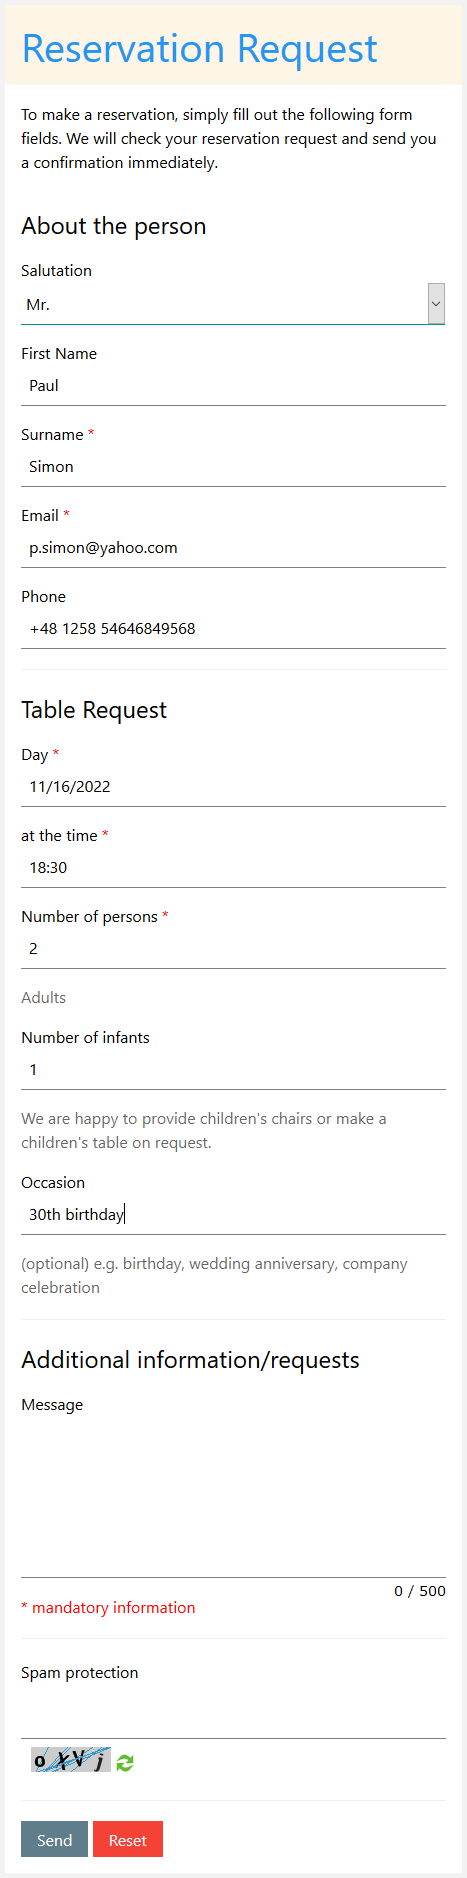 Screenshot of a ready form for reservation requests in responive design